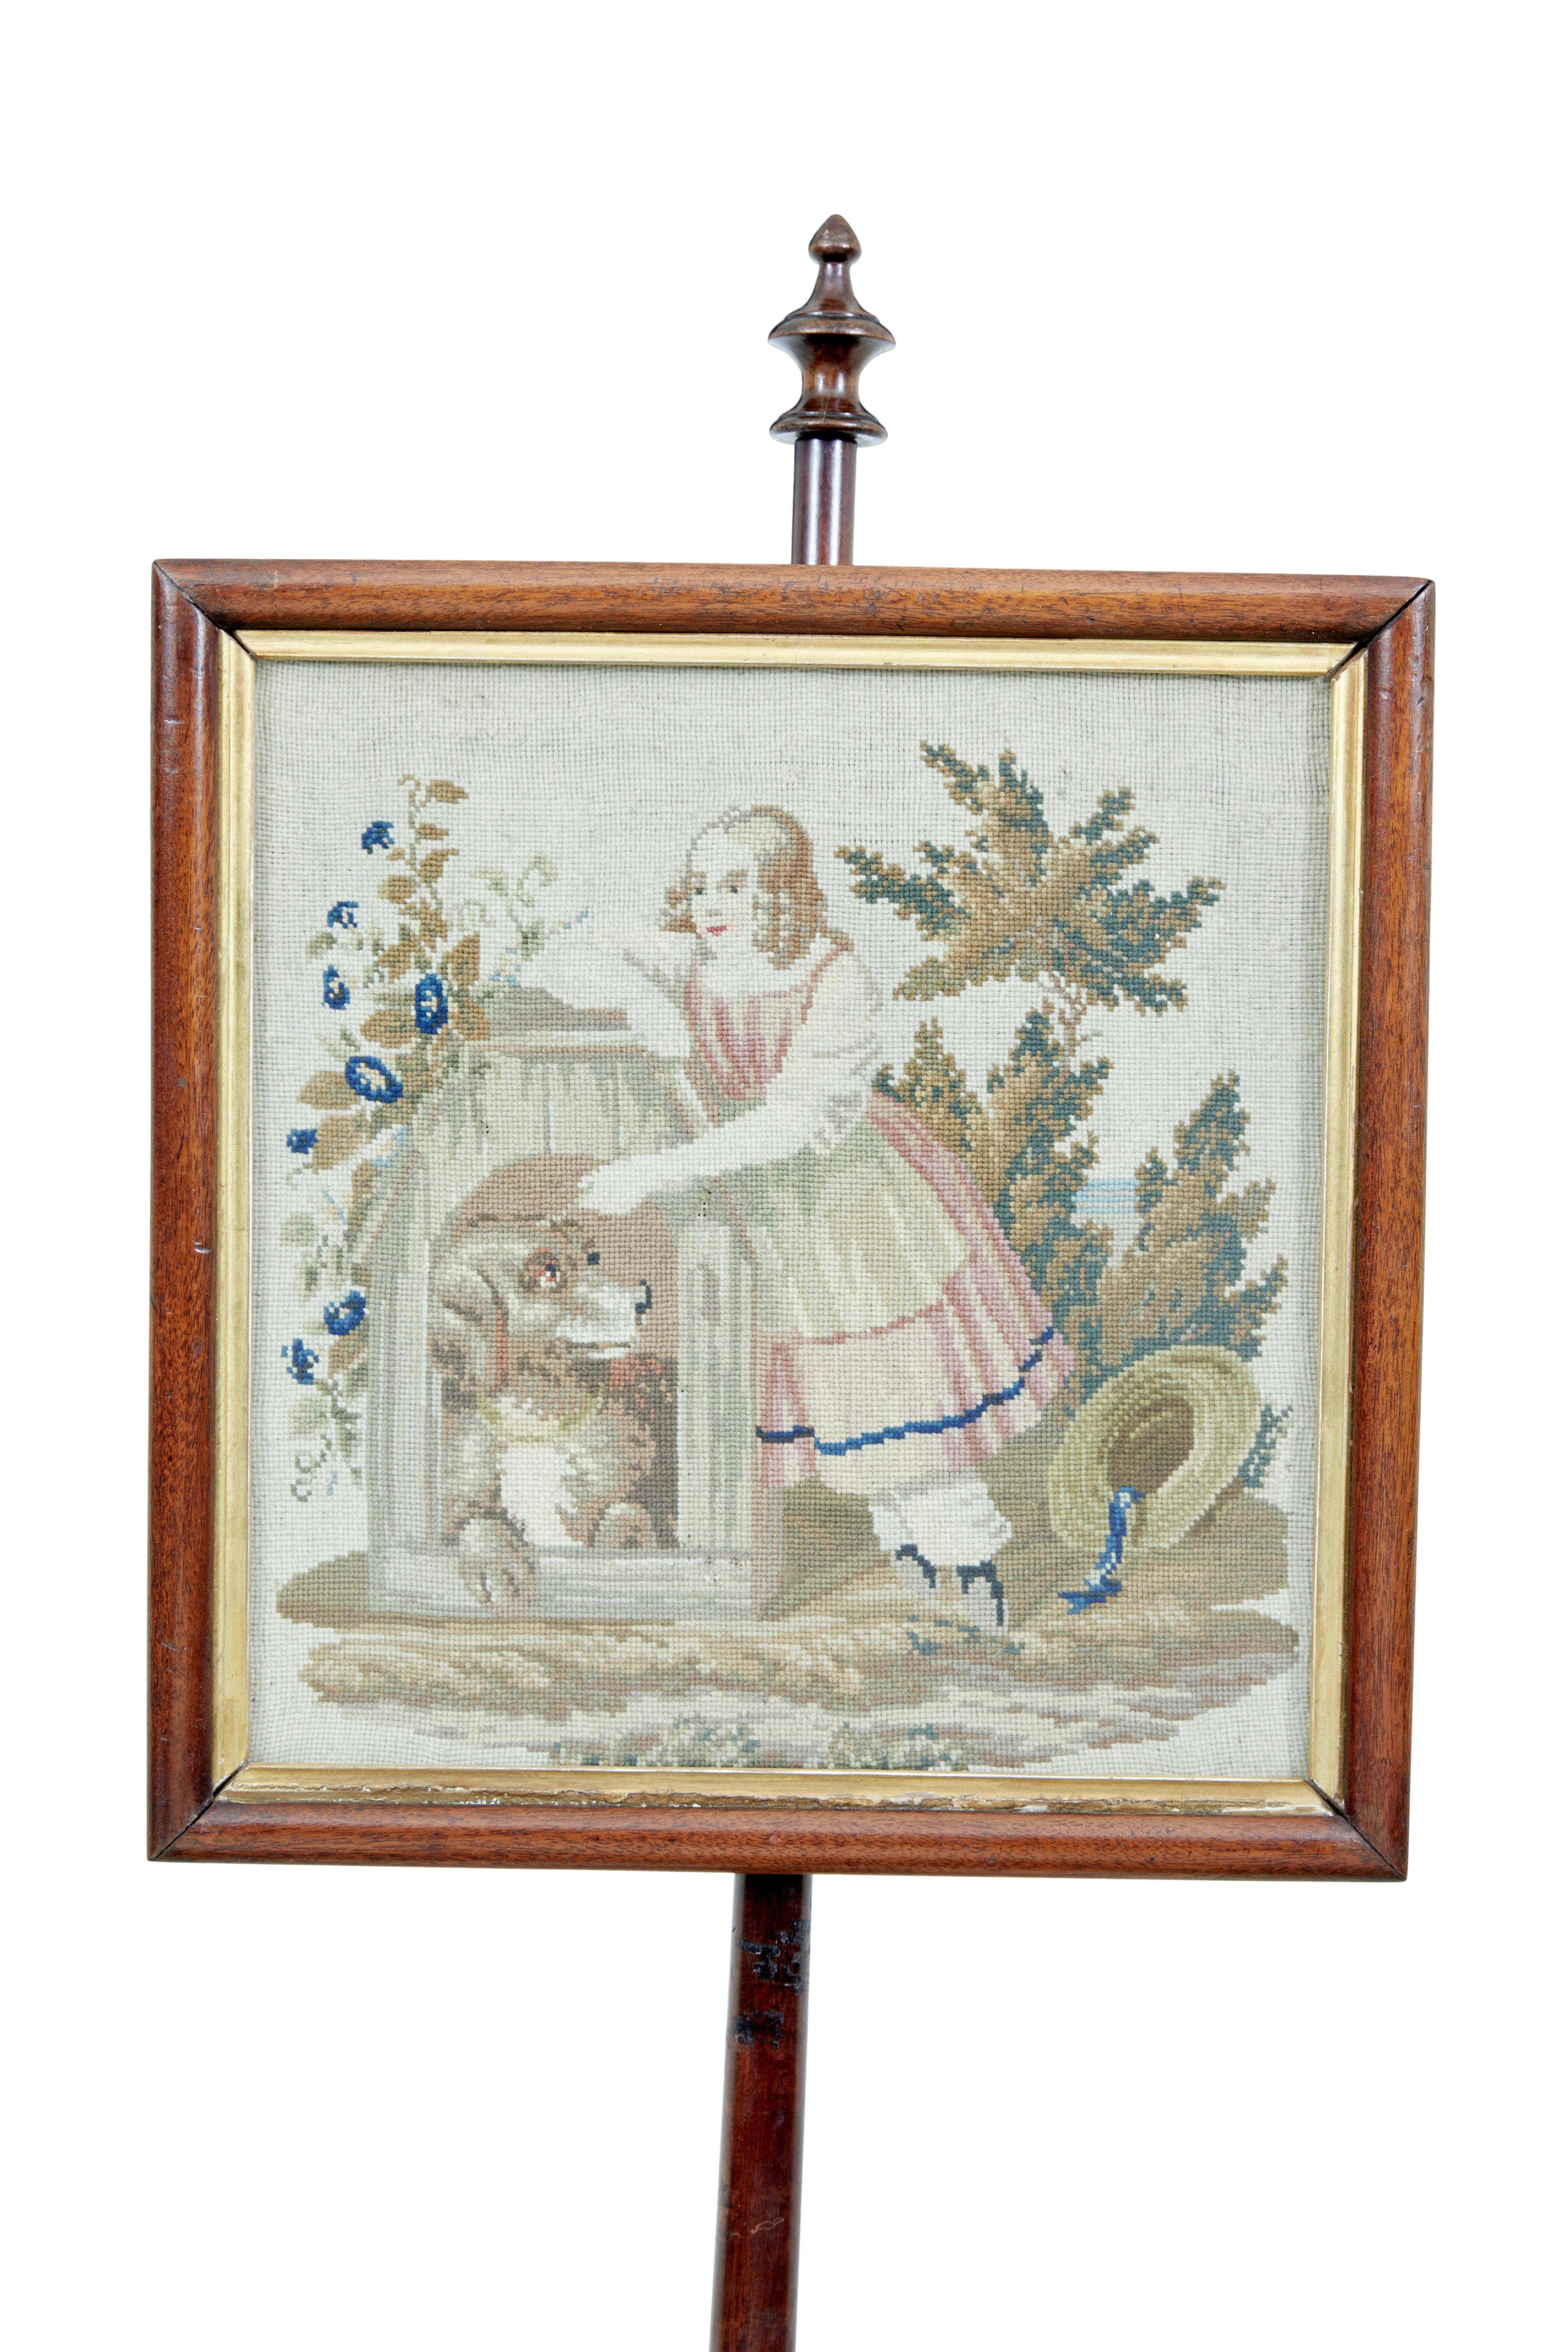 19th century William IV mahogany pole screen, circa 1830

Framed original tapestry depicting a young lady outside with a dog. Frame with gilt slip. Supported by a turned and carved stem, standing on a tripod base with flat bun feet.

Expected marks